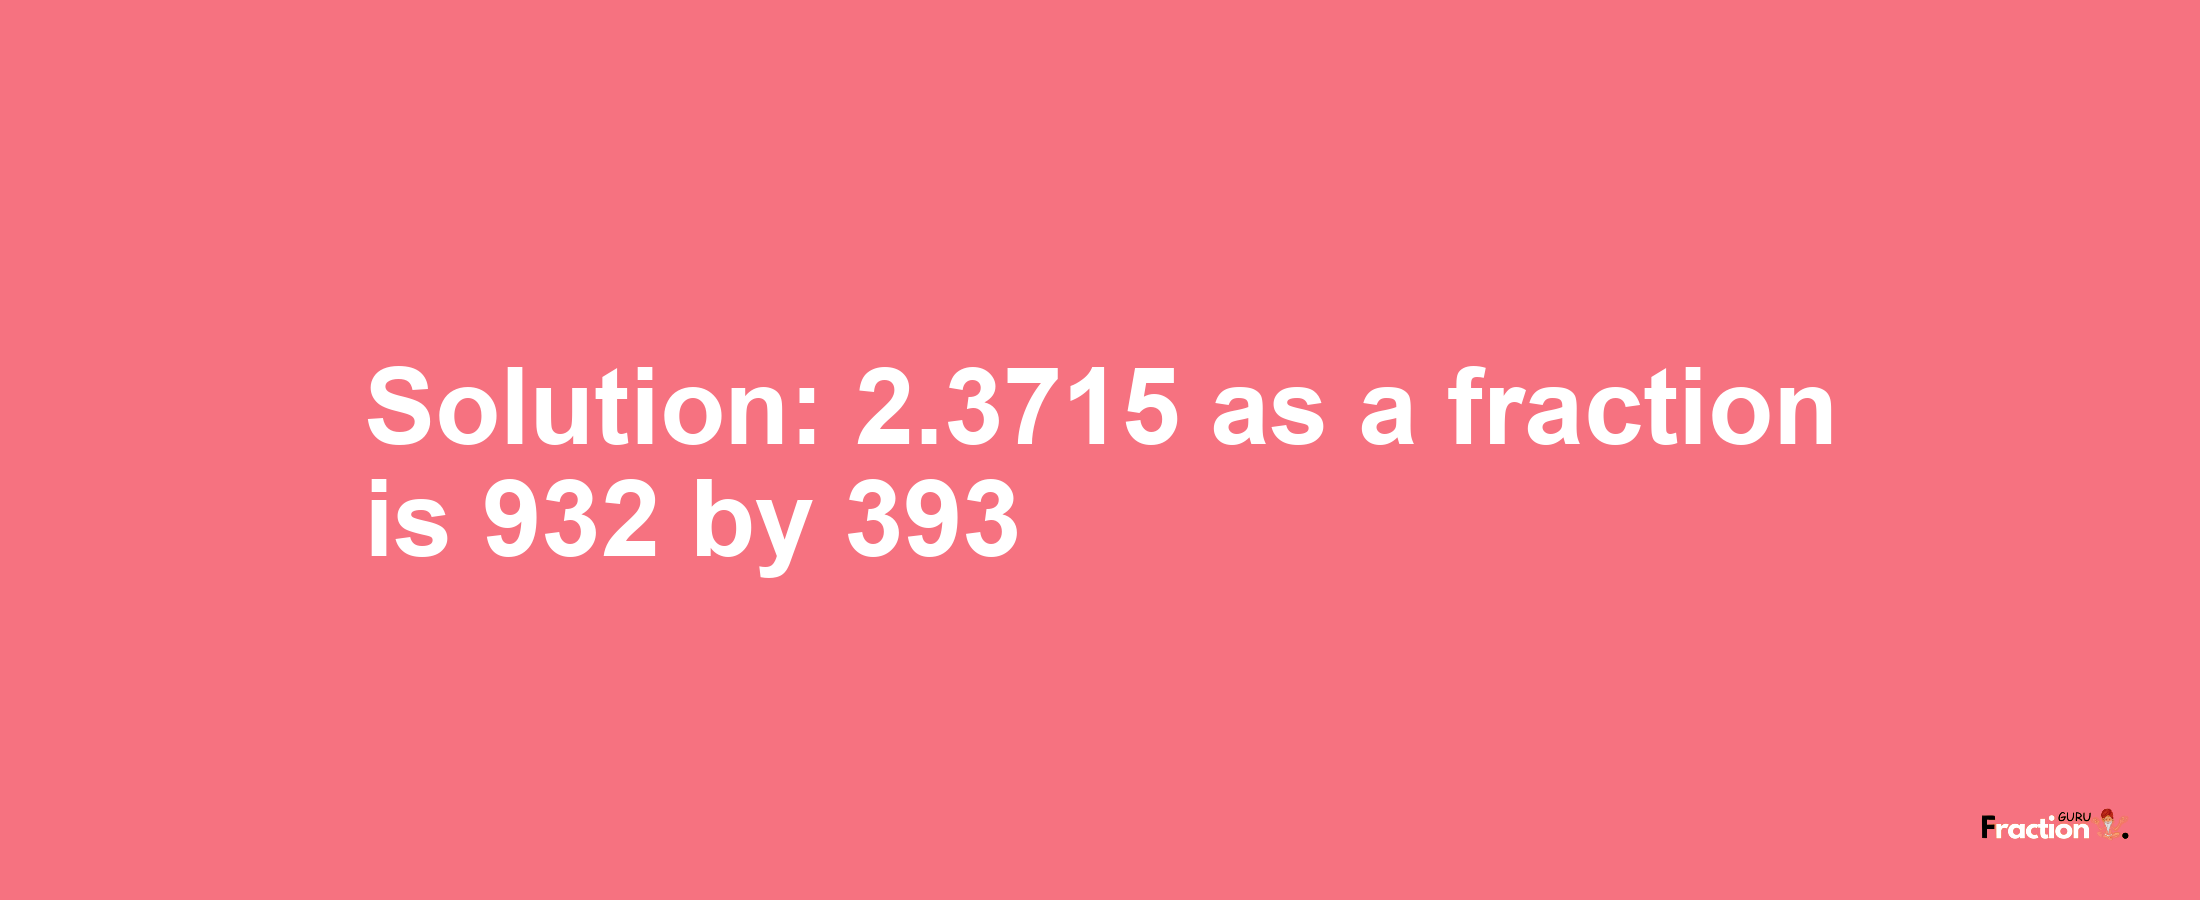 Solution:2.3715 as a fraction is 932/393